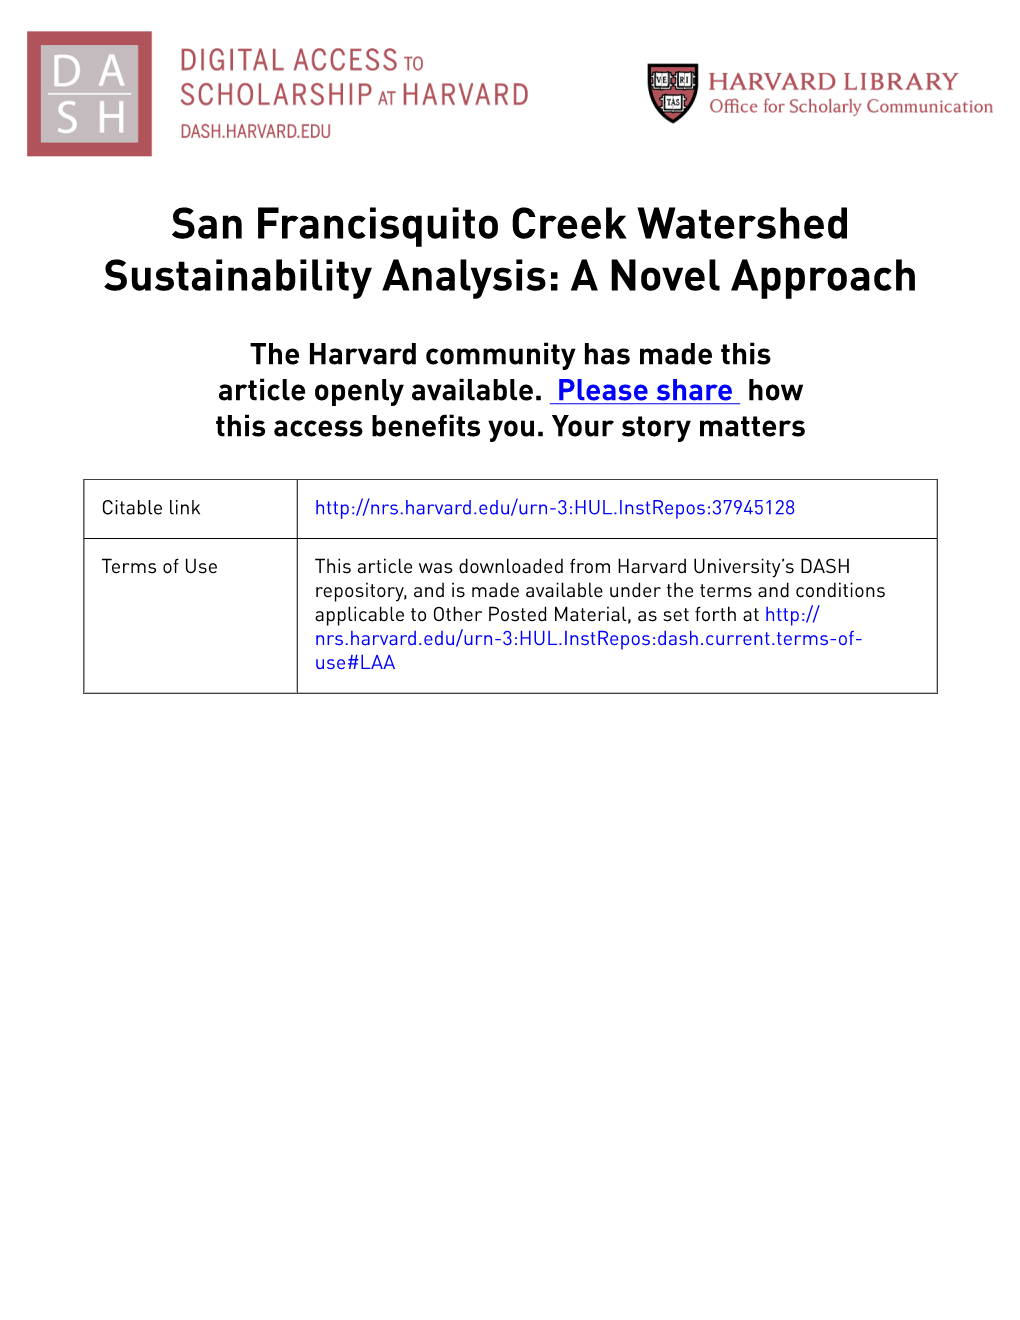 San Francisquito Creek Watershed Sustainability Analysis: a Novel Approach